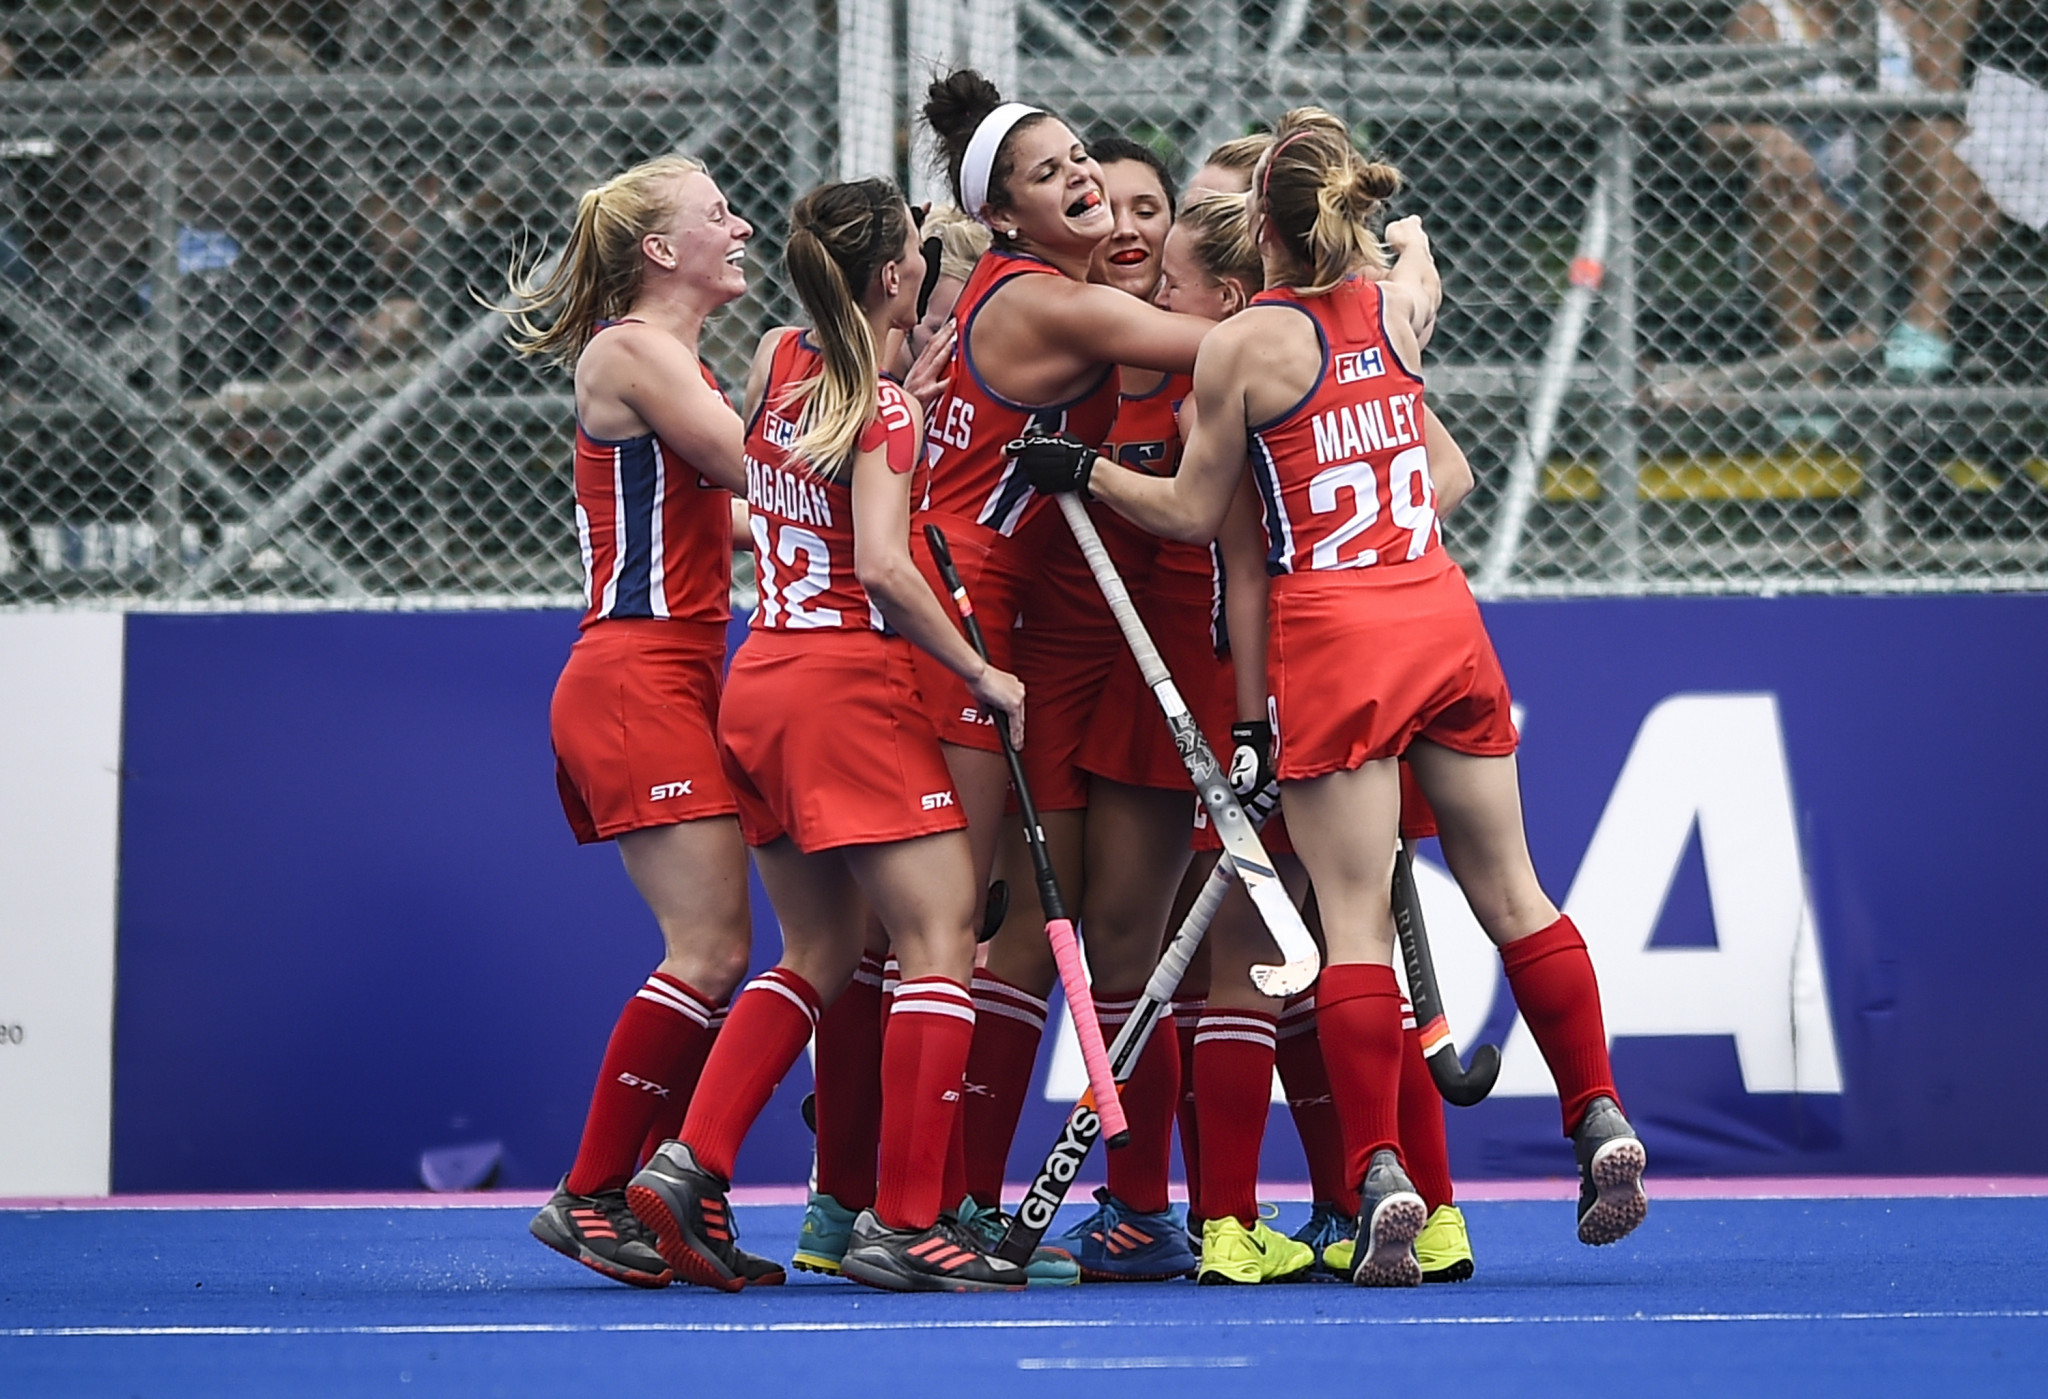 GettyImages 1093151138 - New Nations Cup - Route to the ProLeague - The International Hockey Federation (FIH) has launched the bidding process for the inaugural FIH Nations Cup, which will be played for the first time in 2022.